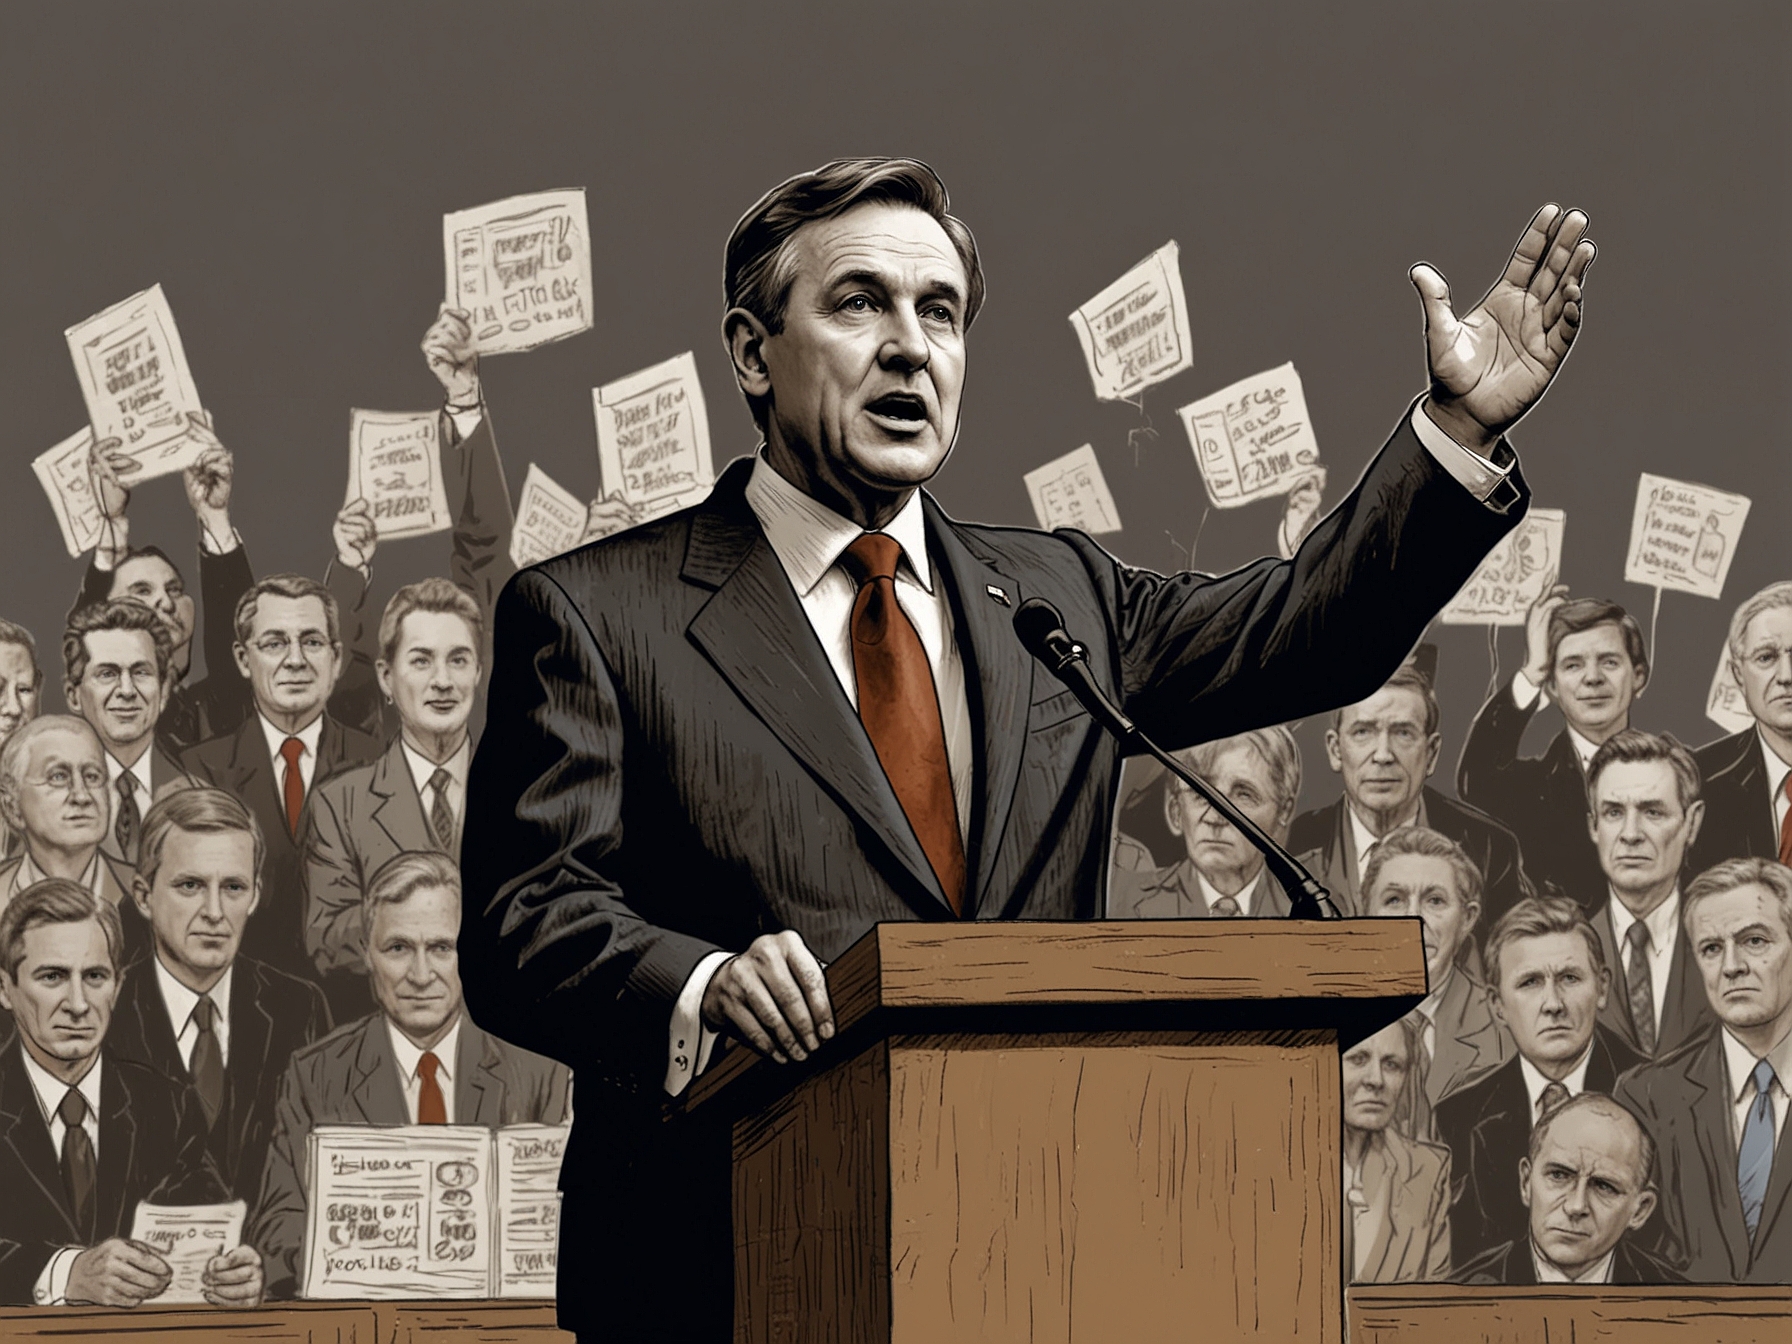 A depiction of a politician addressing a crowd with icons representing taxes and budgets, stressing the importance of transparent communication in politics.